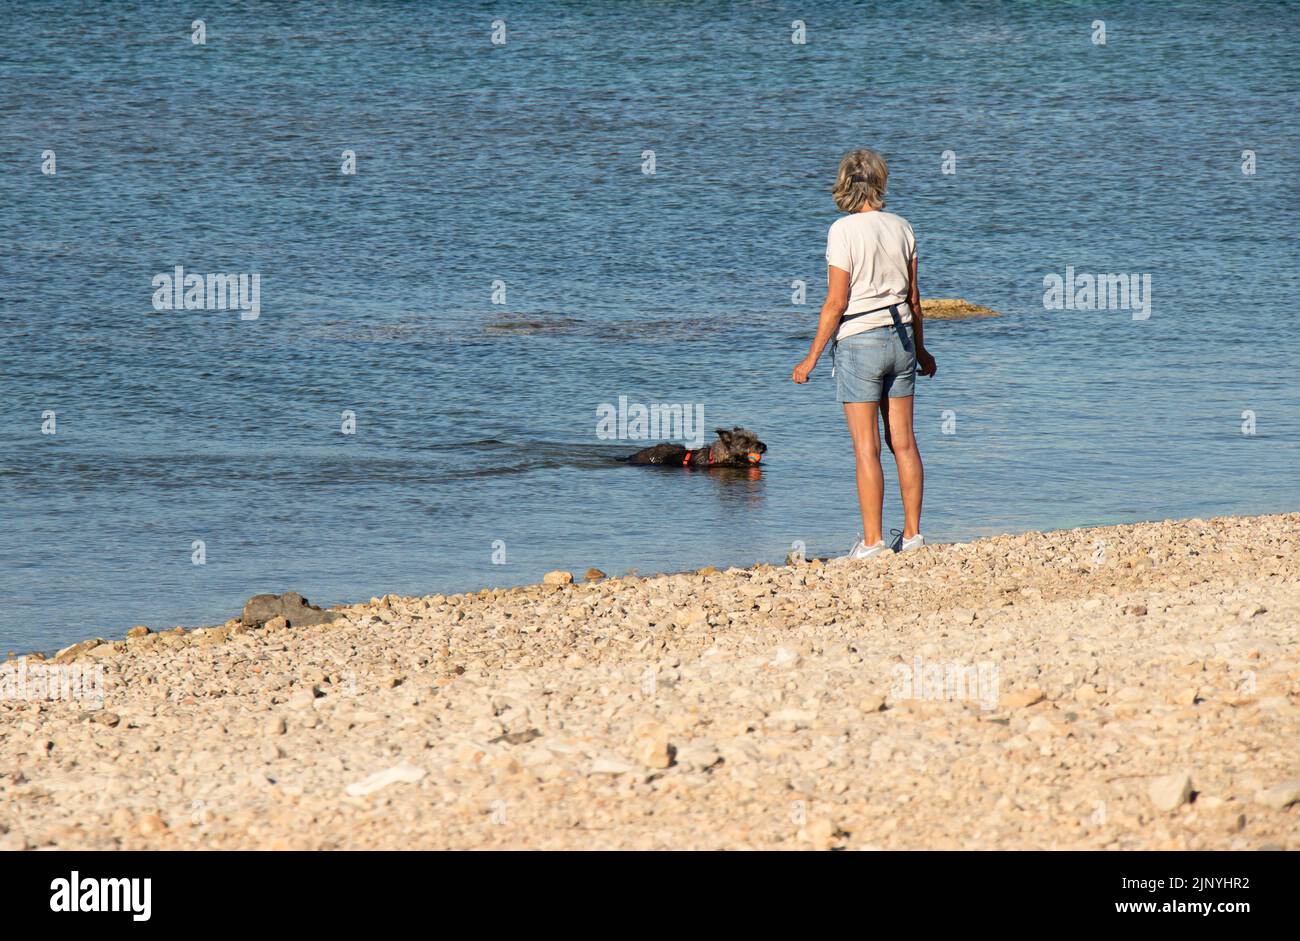 Vodice, Croatia - July 13, 2022: Person standing on the empty pebble beach training the dog to swim holding a ball in its mouth Stock Photo